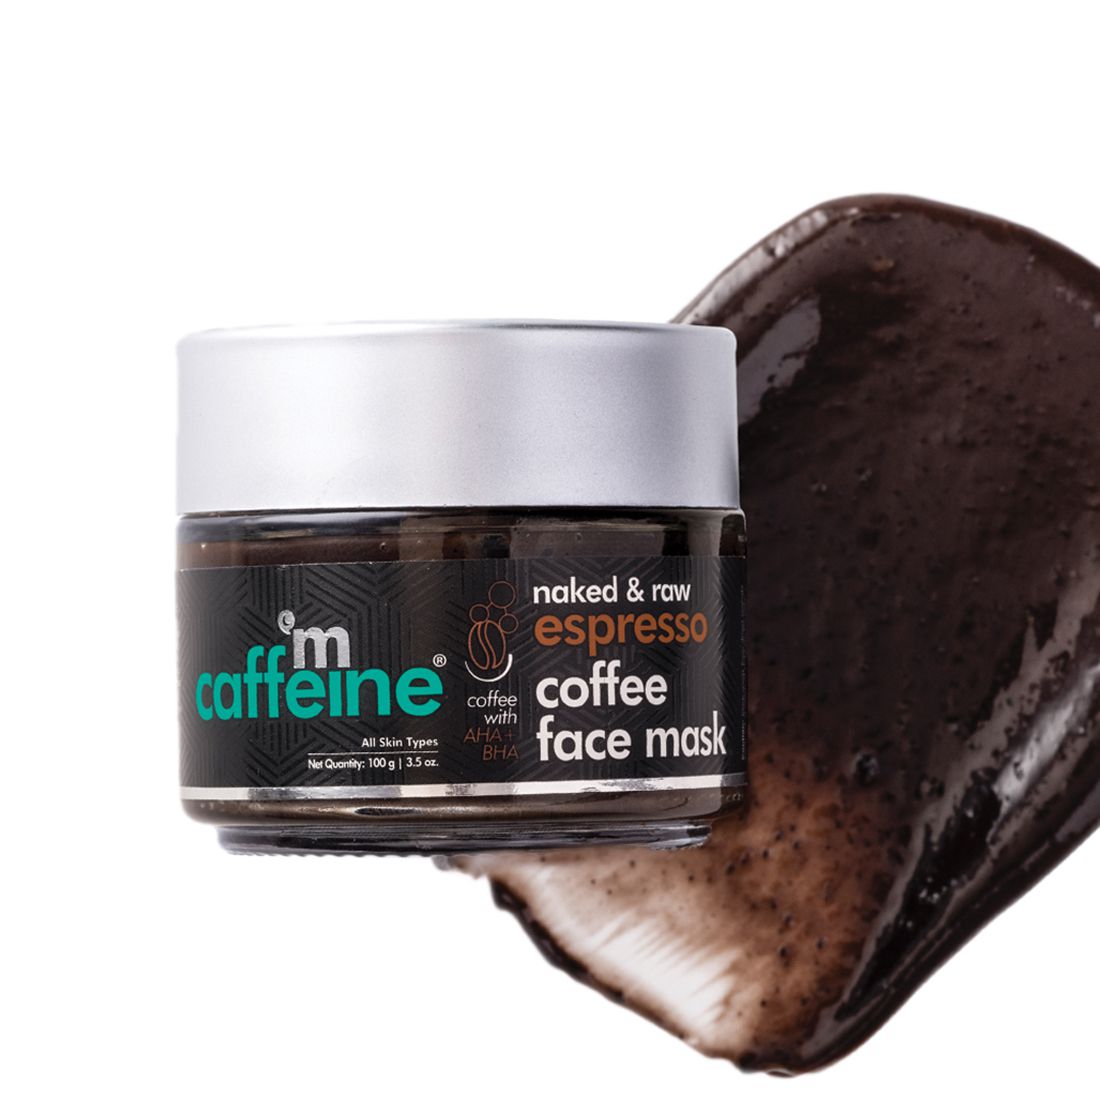 mCaffeine Espresso Coffee Face Mask with Natural AHA & BHA for Exfoliation & Pore Tightening (100 g)